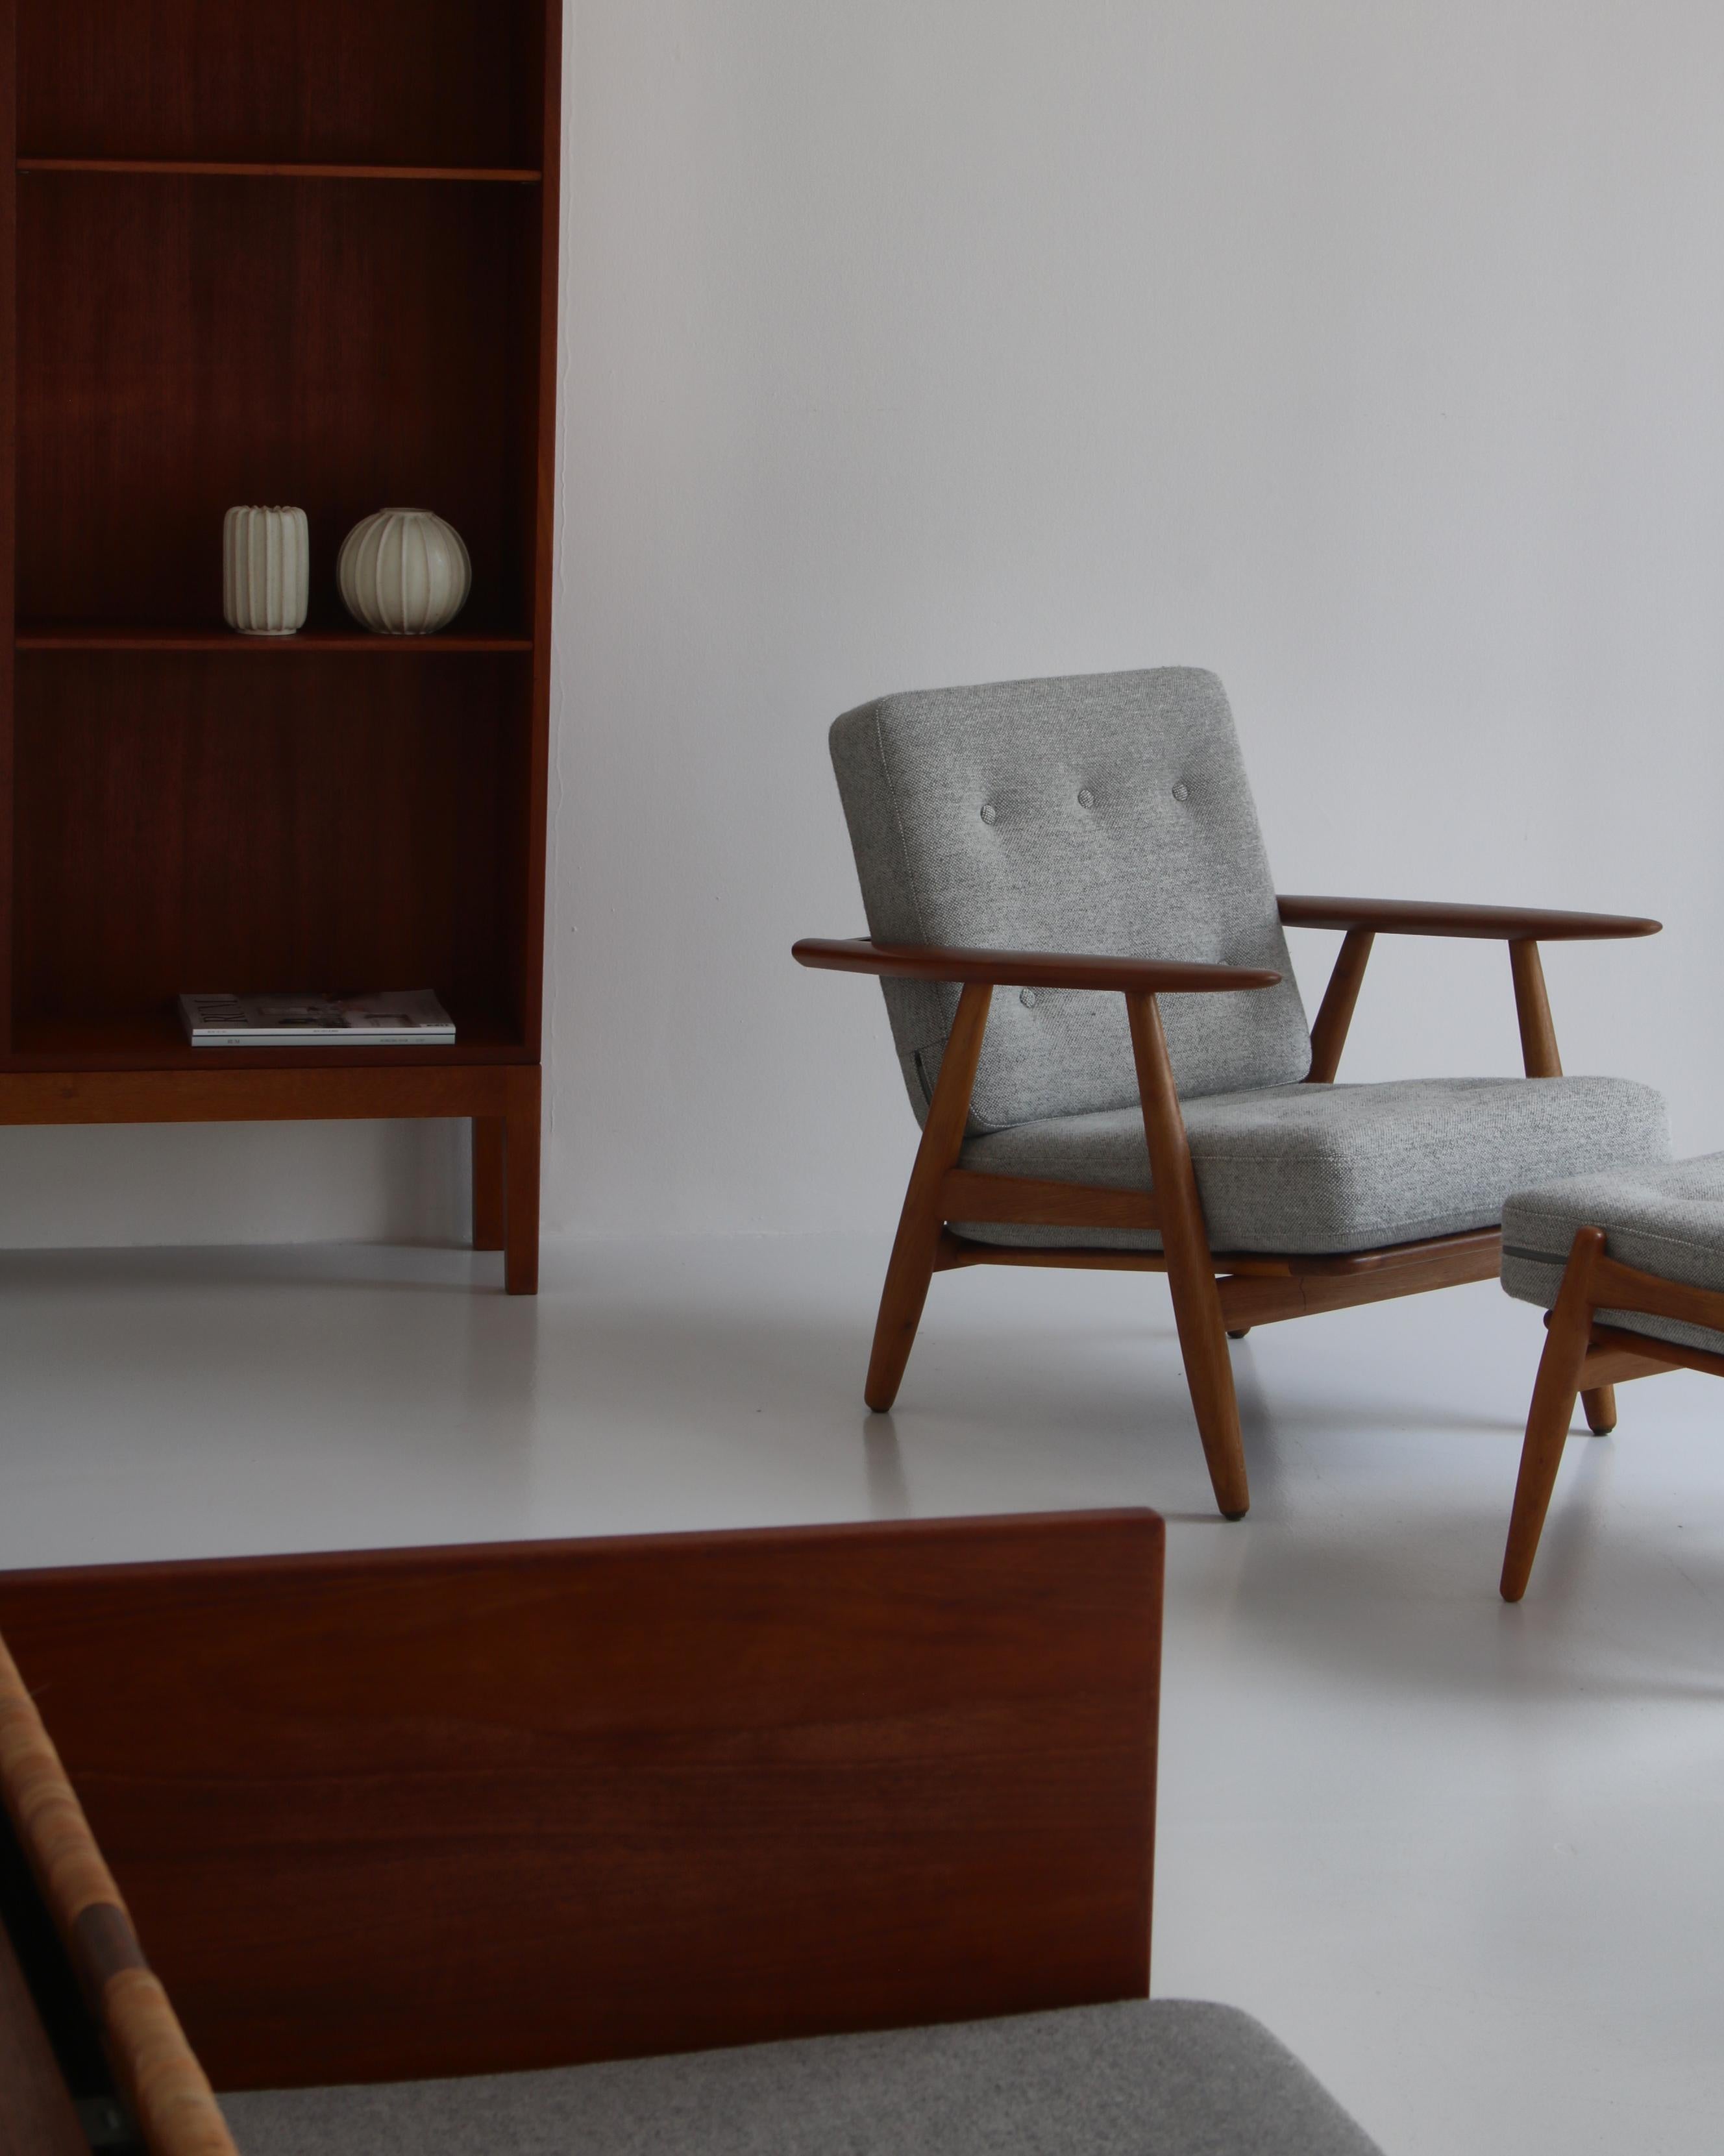 One of the most iconic chairs from the 1950s Danish modern is the 